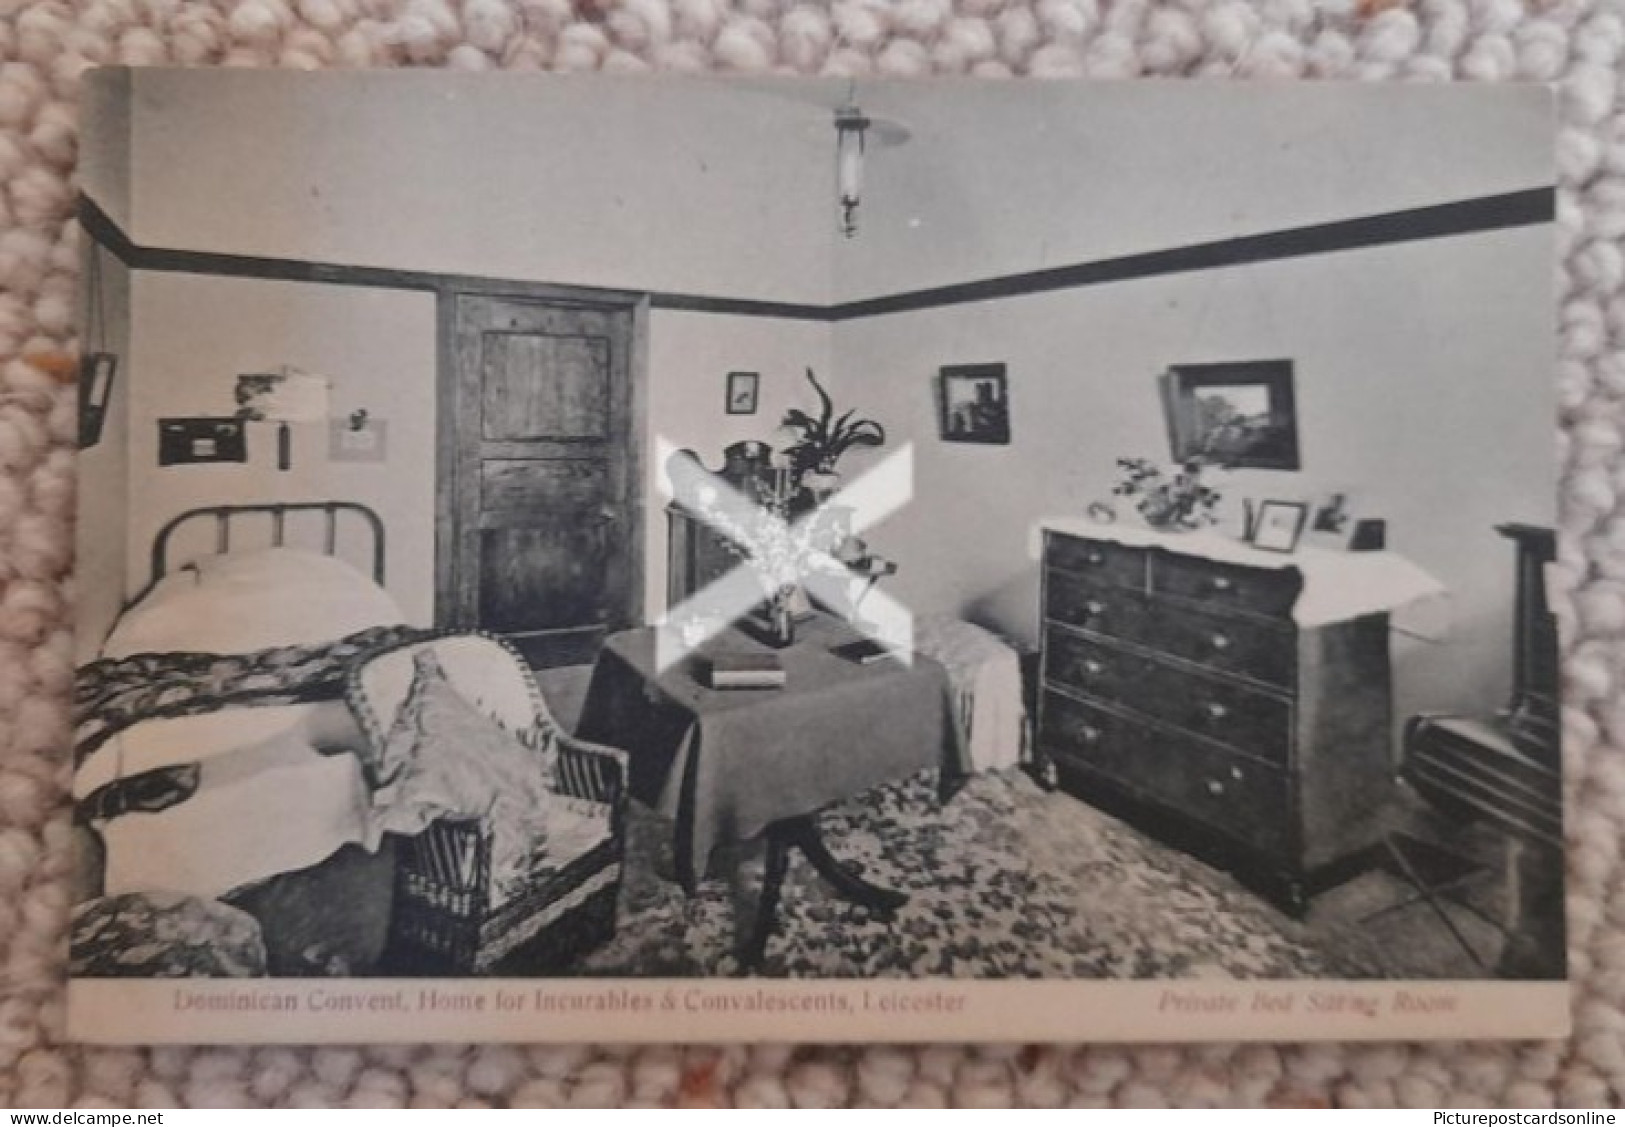 DOMINICAN CONVENT HOME FOR INCURABLES & CONVALESCENTS OLD B/W POSTCARD LEICESTERSHIRE PRIVATE BED SITTING ROOM - Leicester